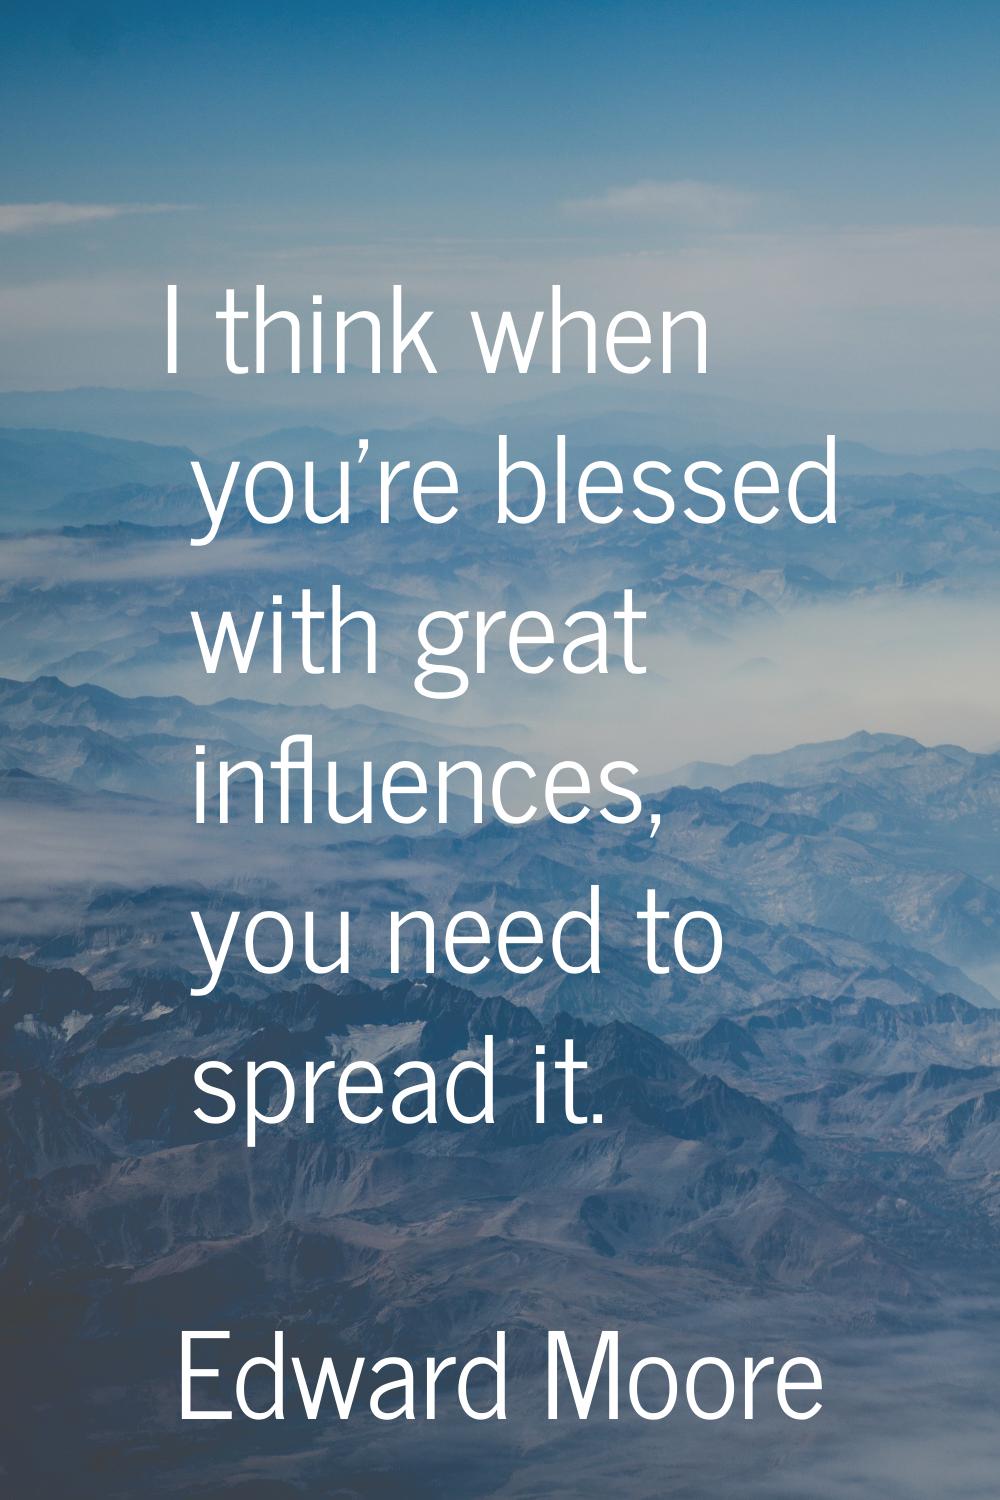 I think when you're blessed with great influences, you need to spread it.